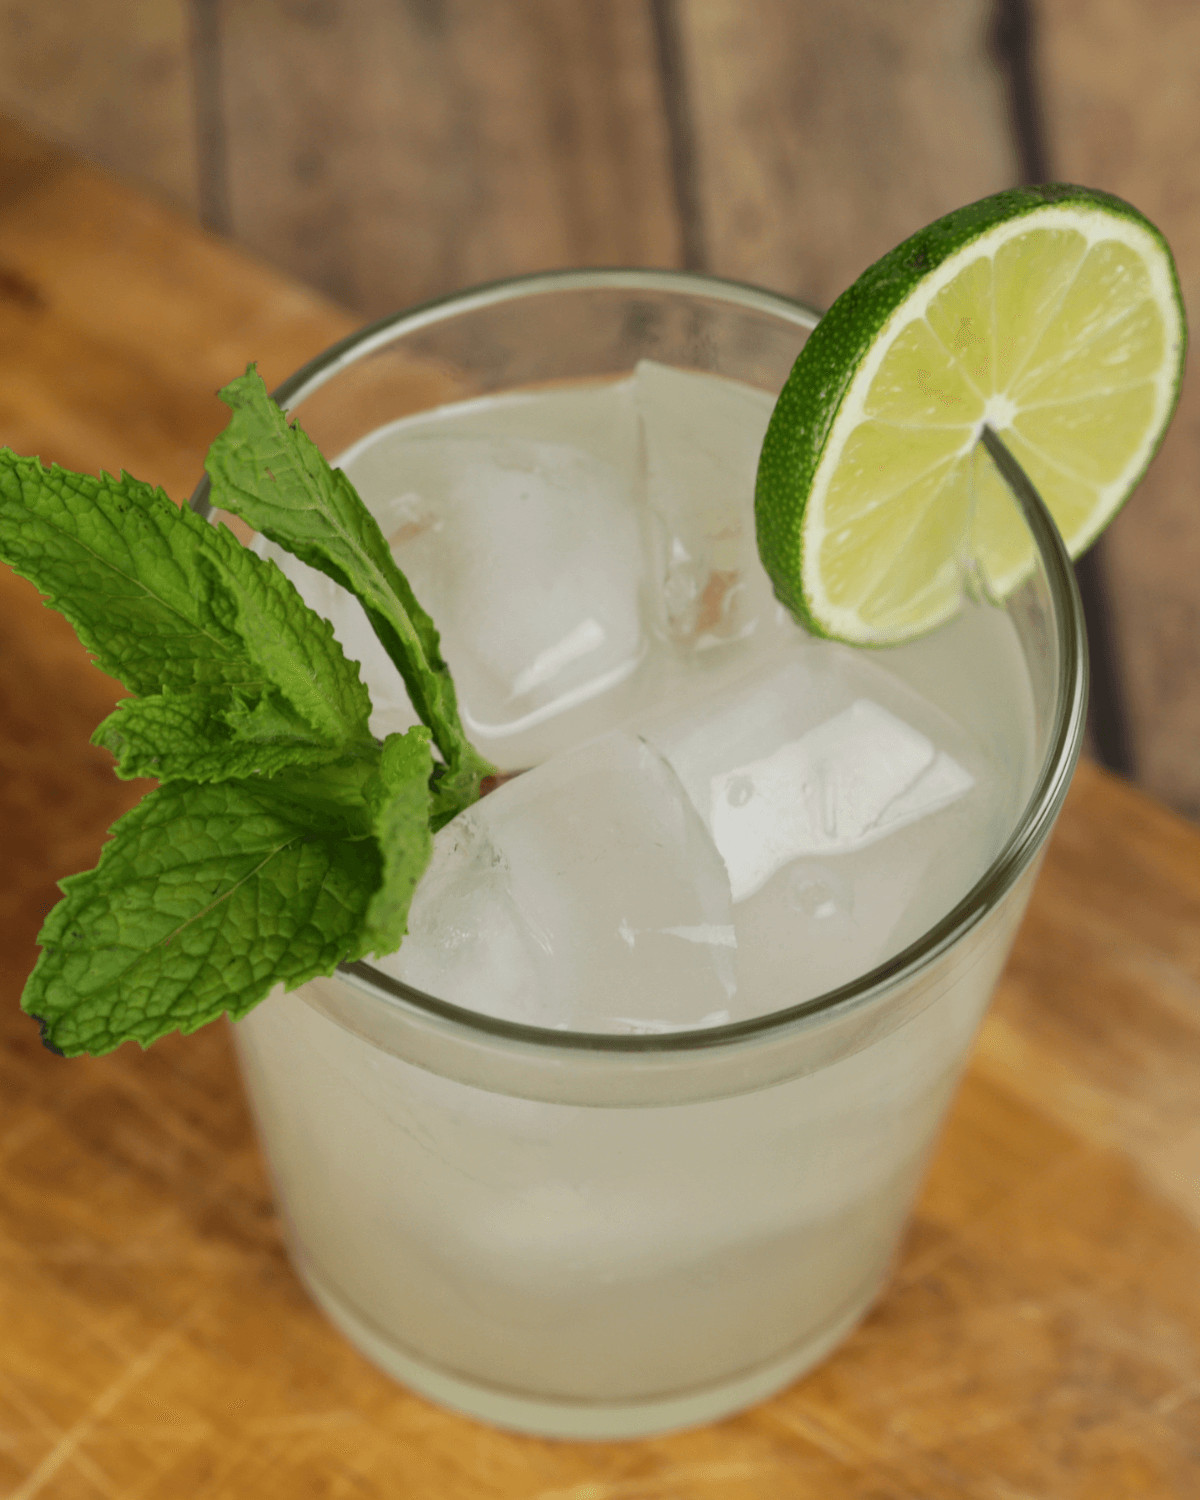 A refreshing lime moonshine drink garnished with a sprig of mint on a wooden surface.